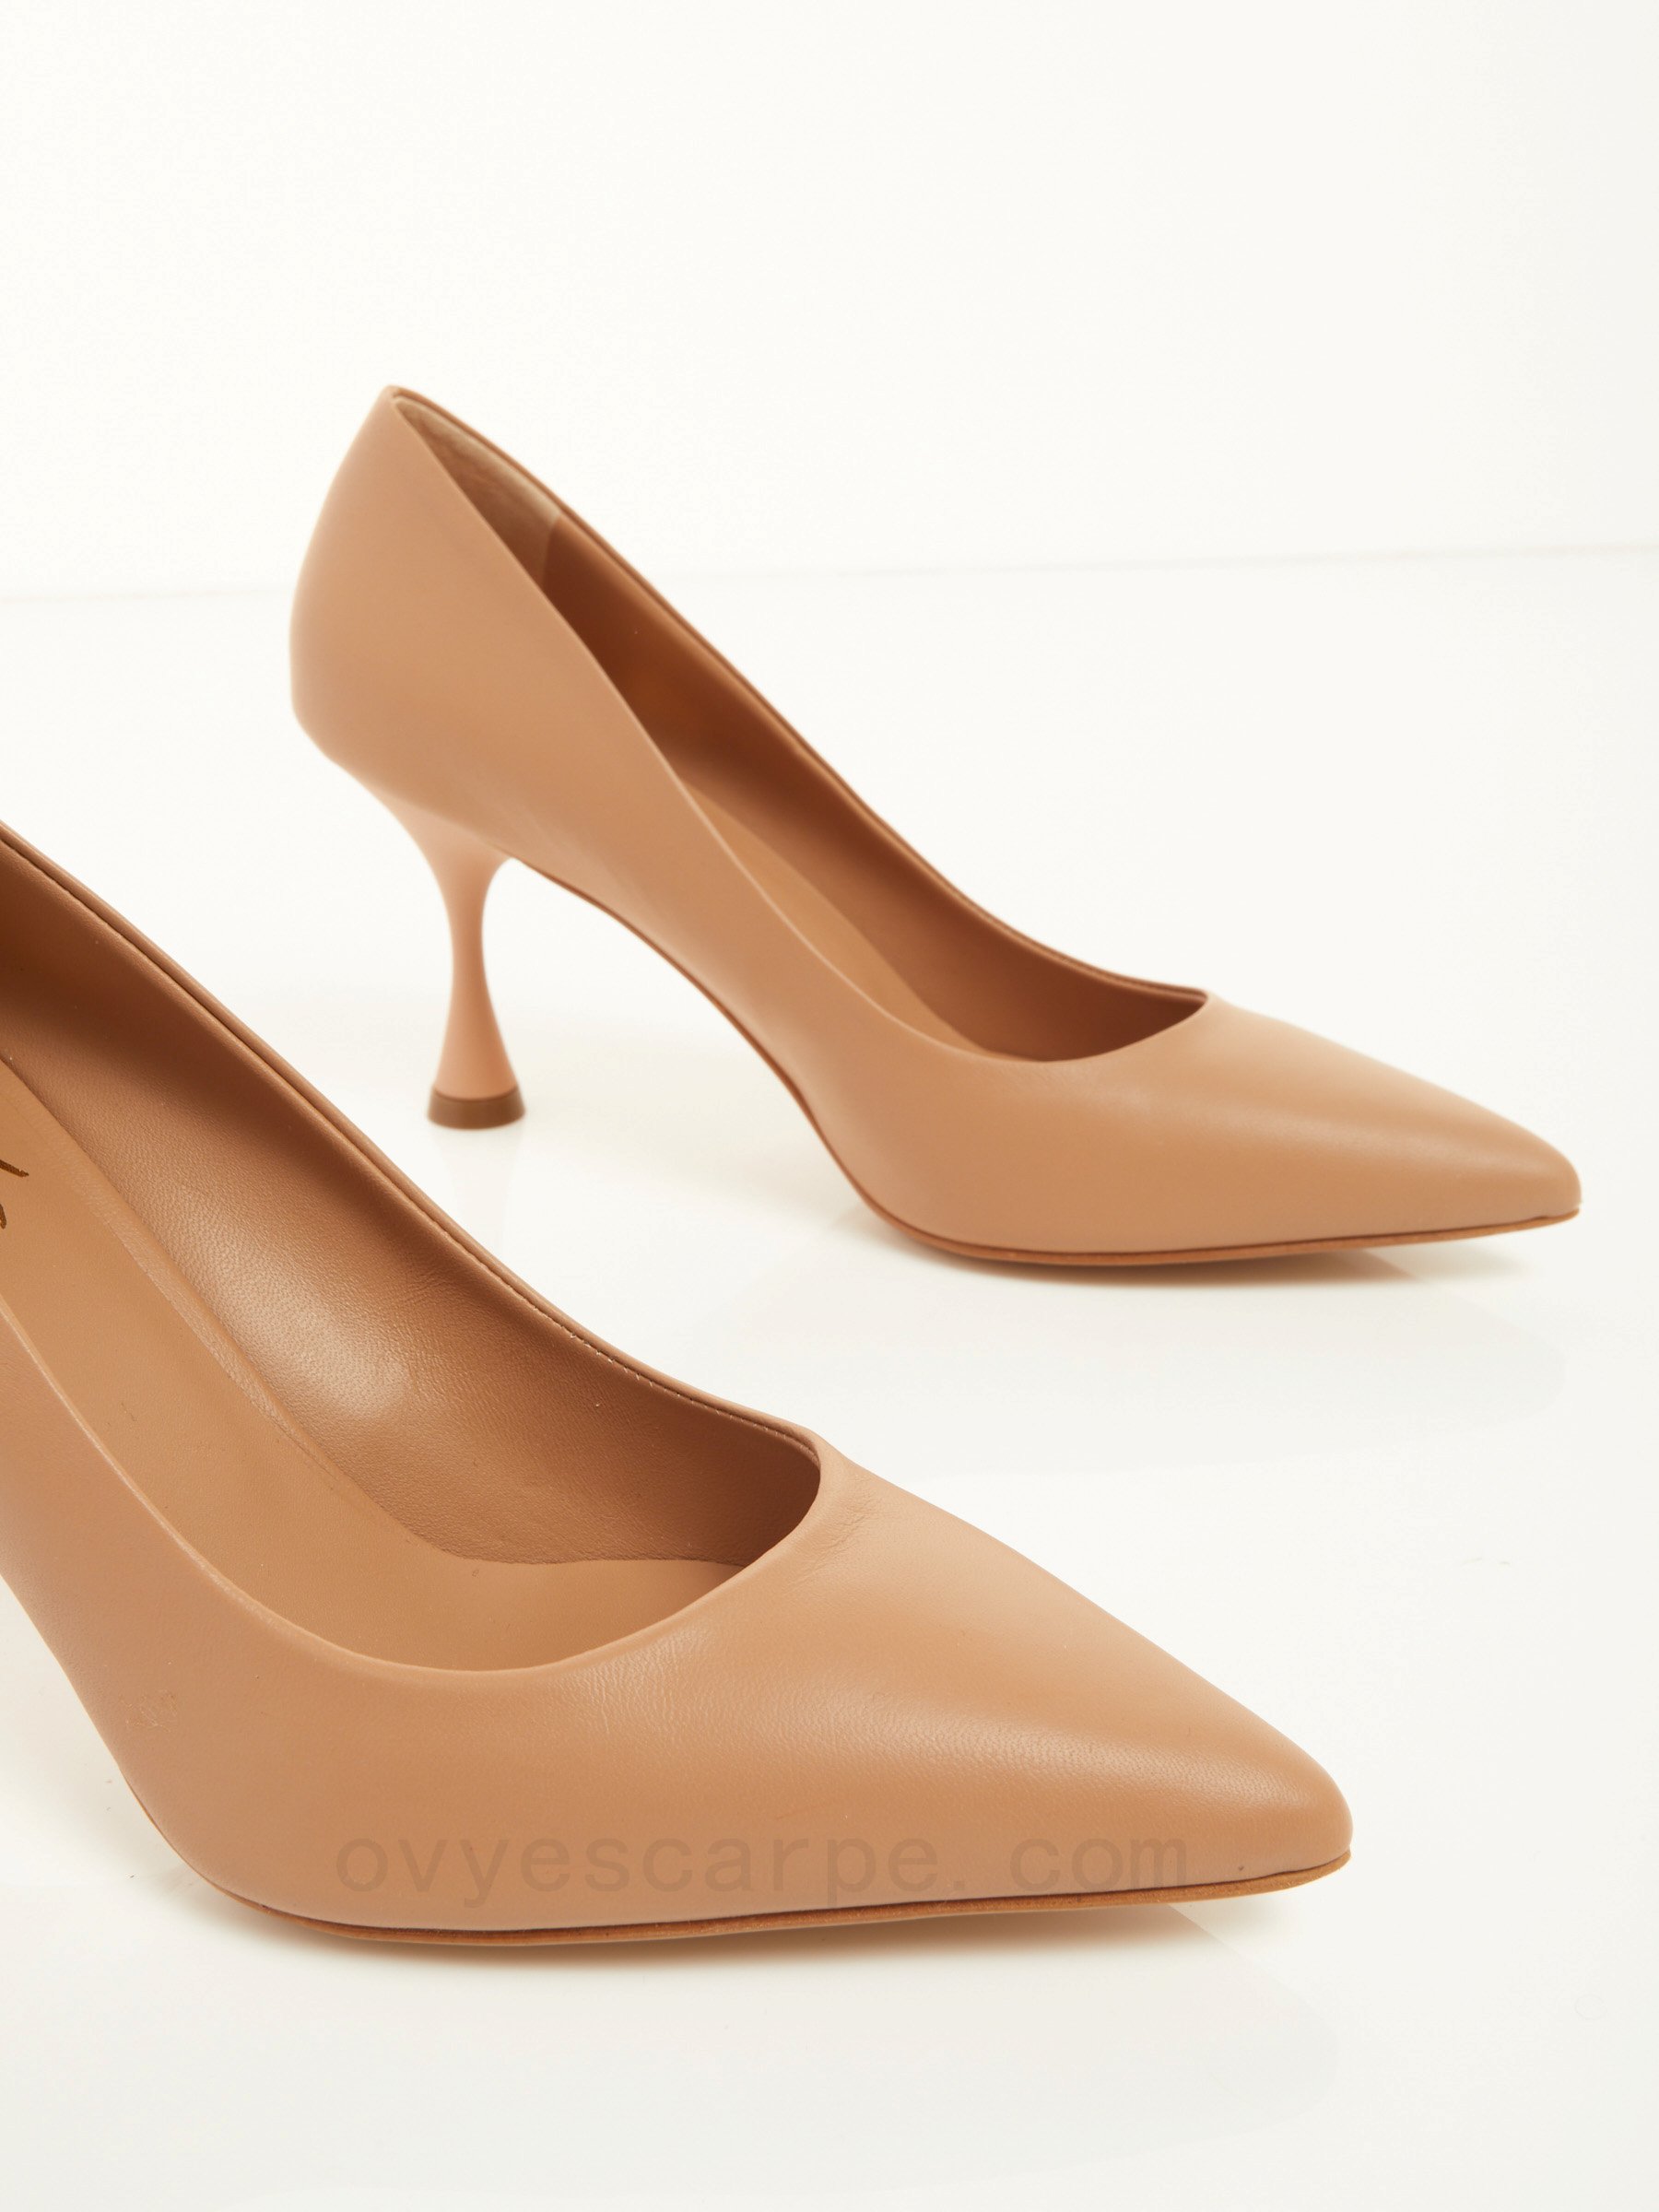 Leather Pump F08161027-0614 Outlet Online